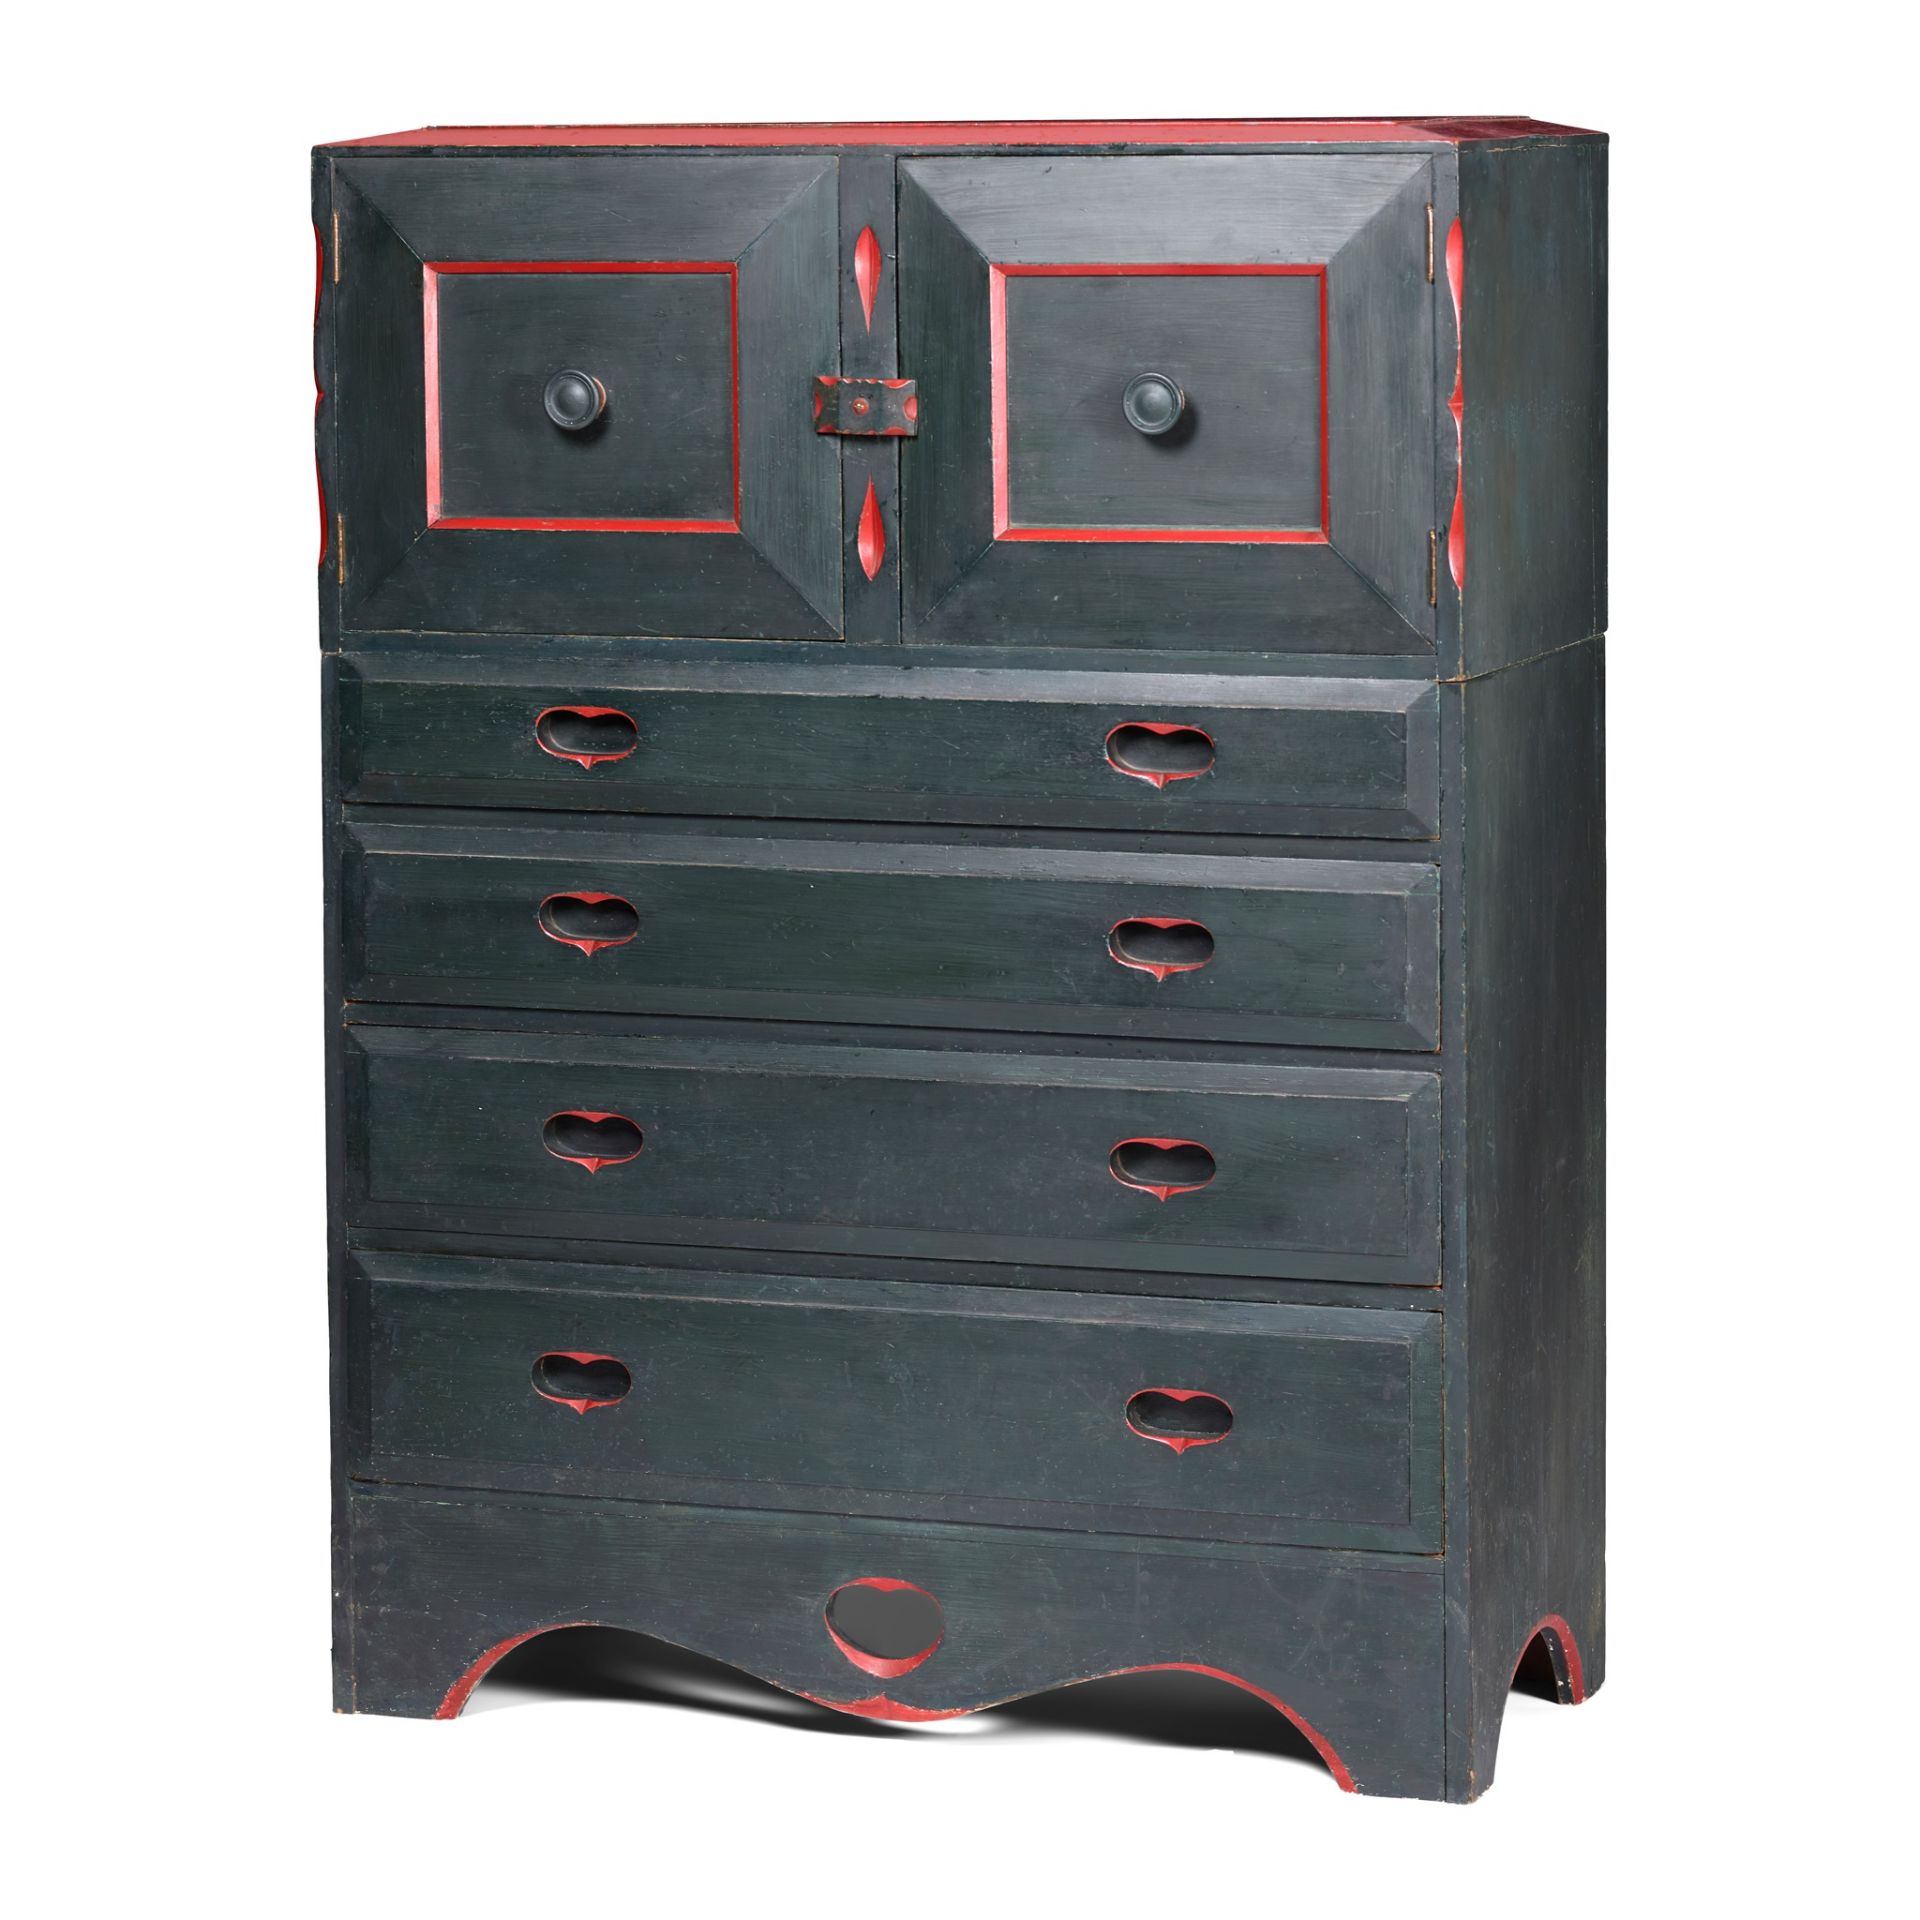 AMBROSE HEAL (1872-1959) FOR HEAL & SON, LONDON RARE “THE COTTAGERS CHEST”, CIRCA 1898 - Image 2 of 3